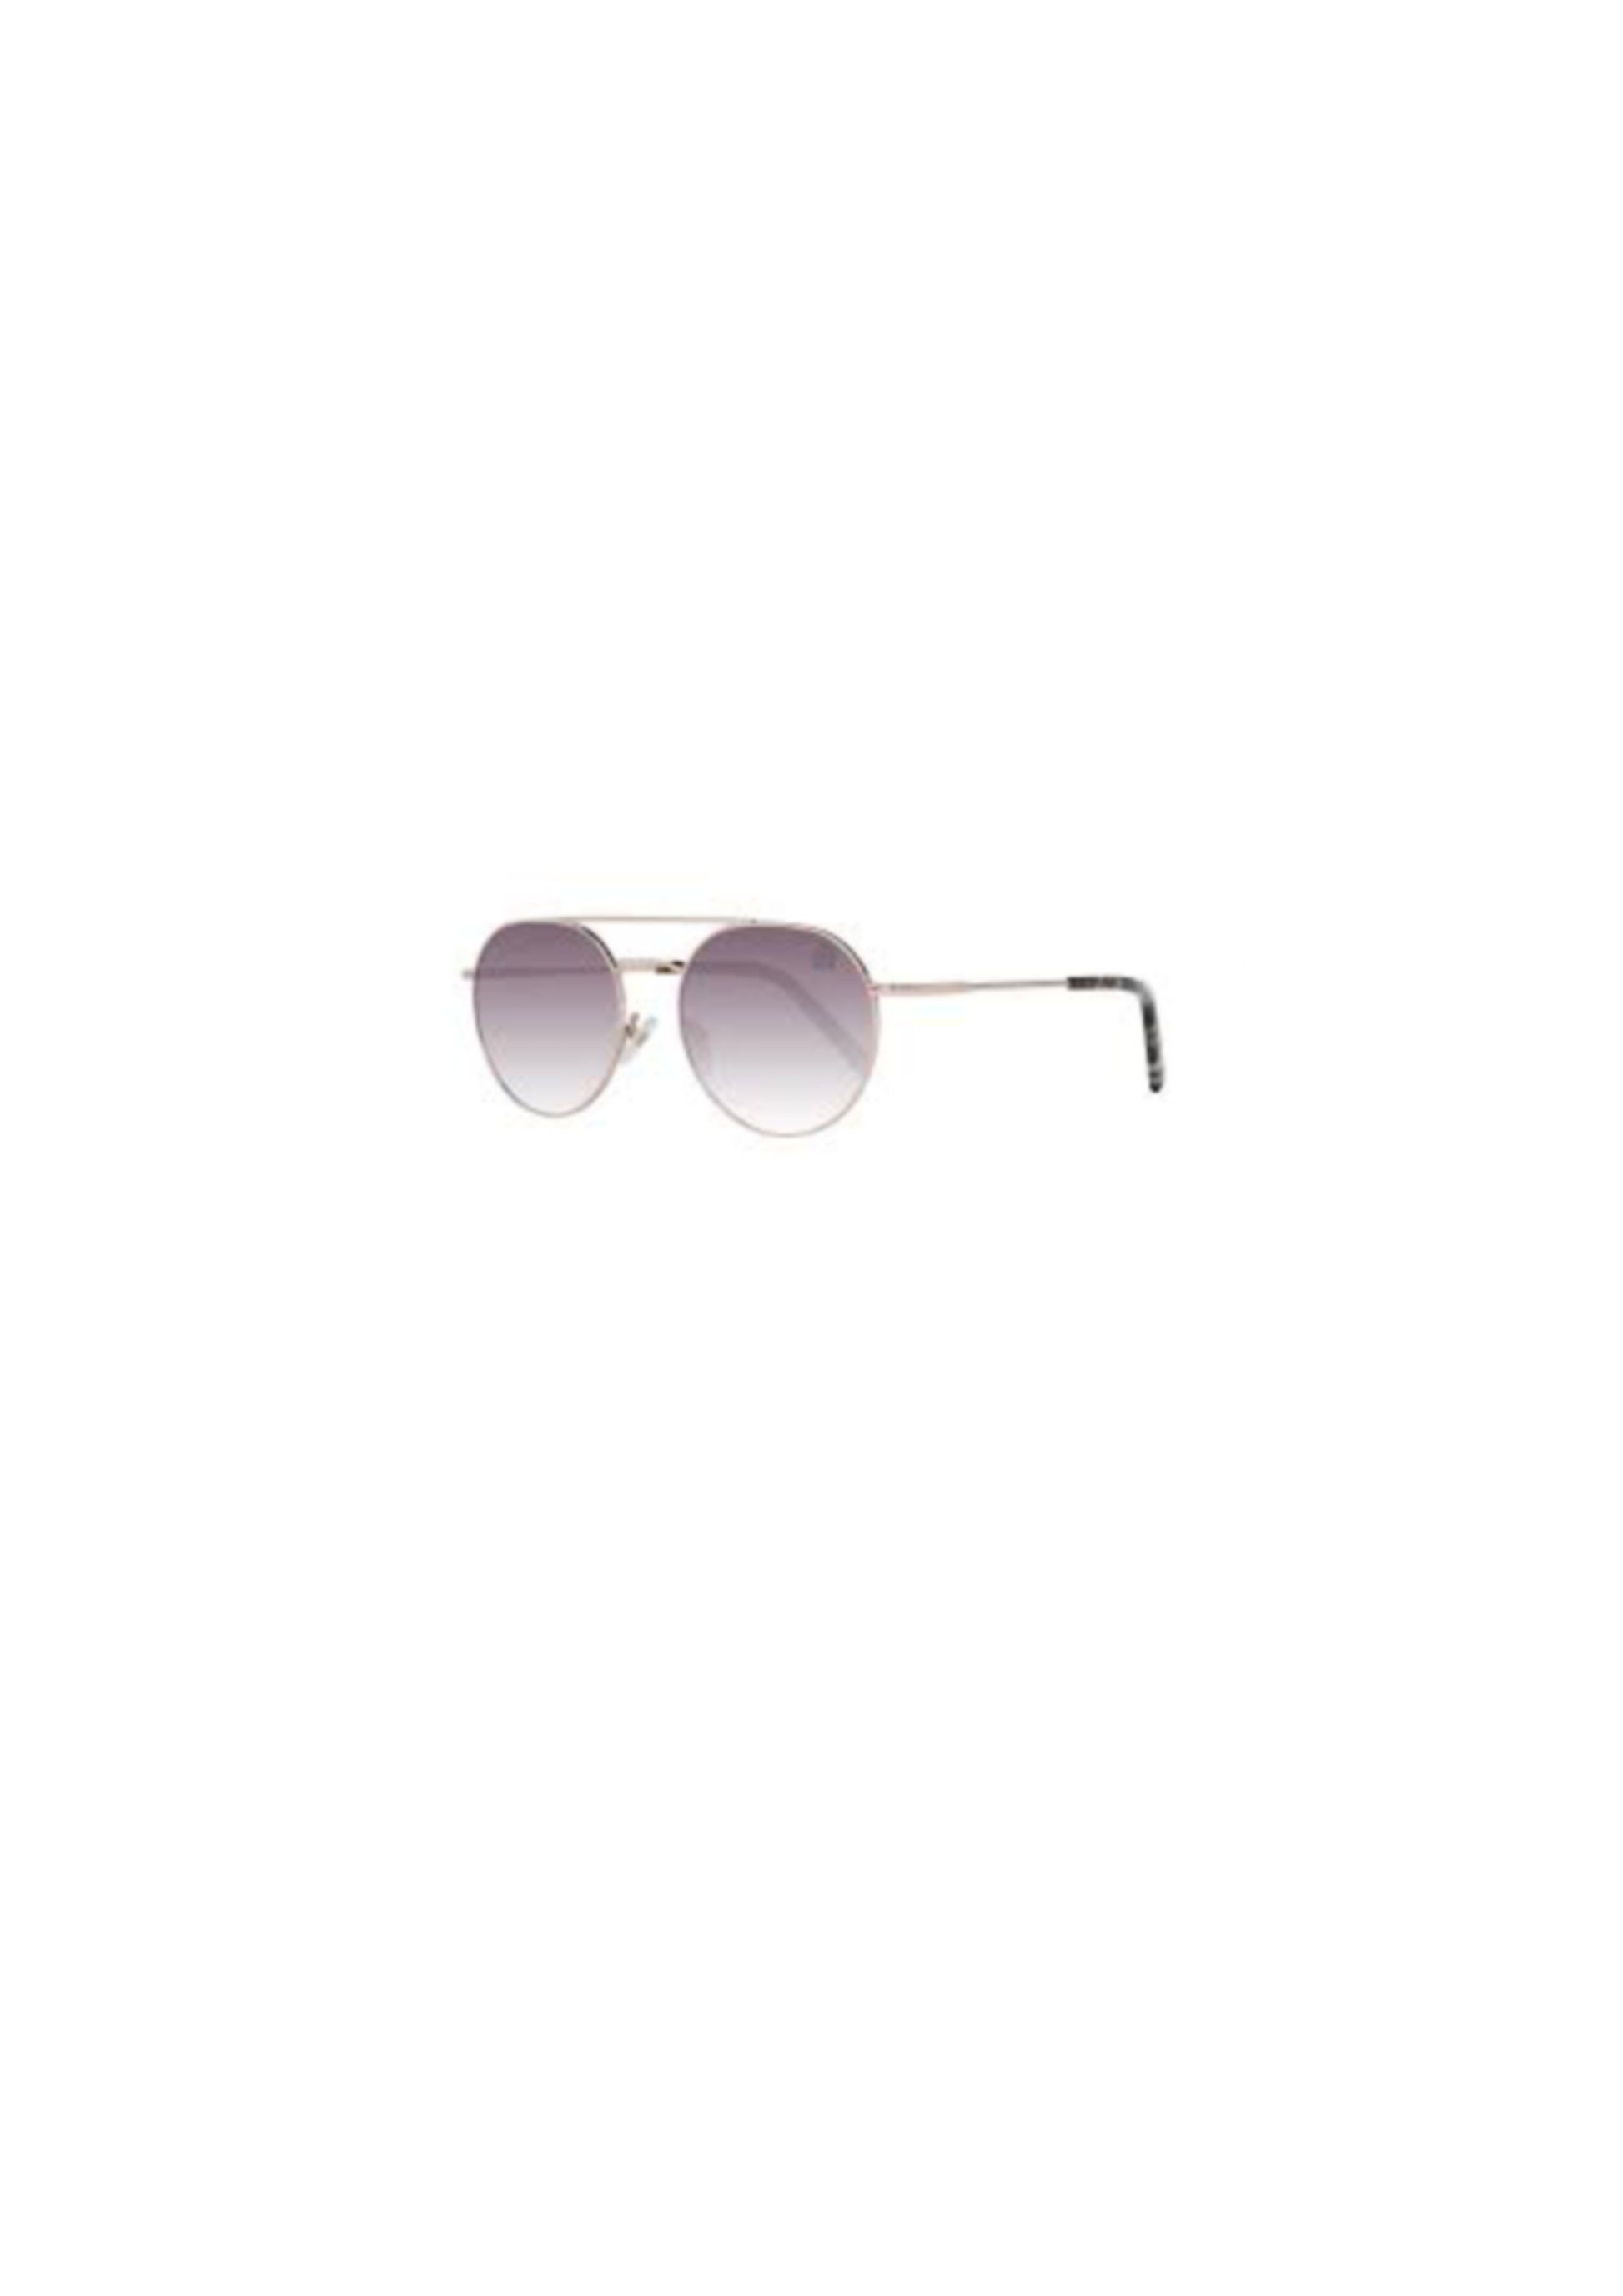 TIMBERLAND TB9158-28H-54  If you like to show off the latest in fashion accessories don't miss out on Unisex Sunglasses Timberland TB9158-5428H Golden (54 Mm)! Show off the best brands.  Gender: Unisex Material: Metal Colour: Golden Crystal: 54 mm Bridge: 18 mm Legs: 145 mm Filter: Class 3 Protect against 100% of the UV rays (UV400) Includes the brand's case Type: Polarised